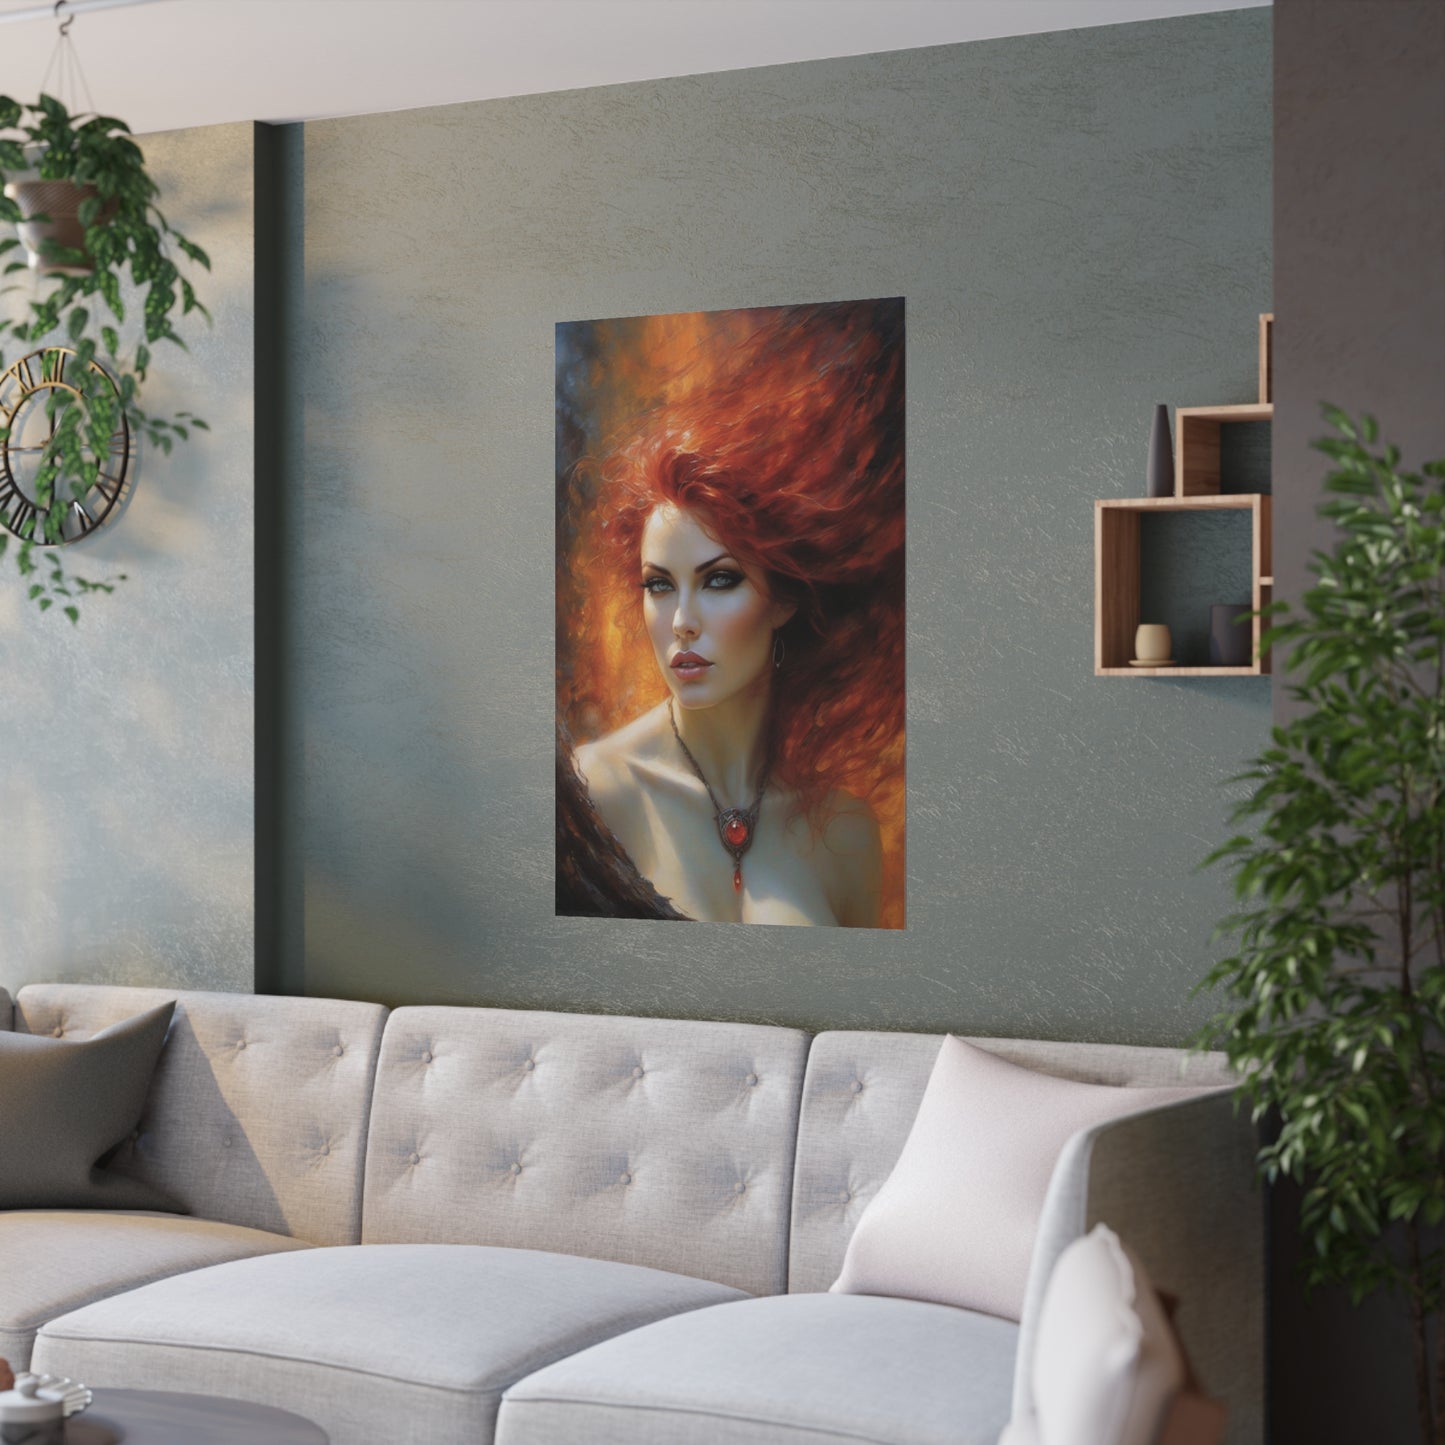 Redhead fire Satin Posters (210gsm)